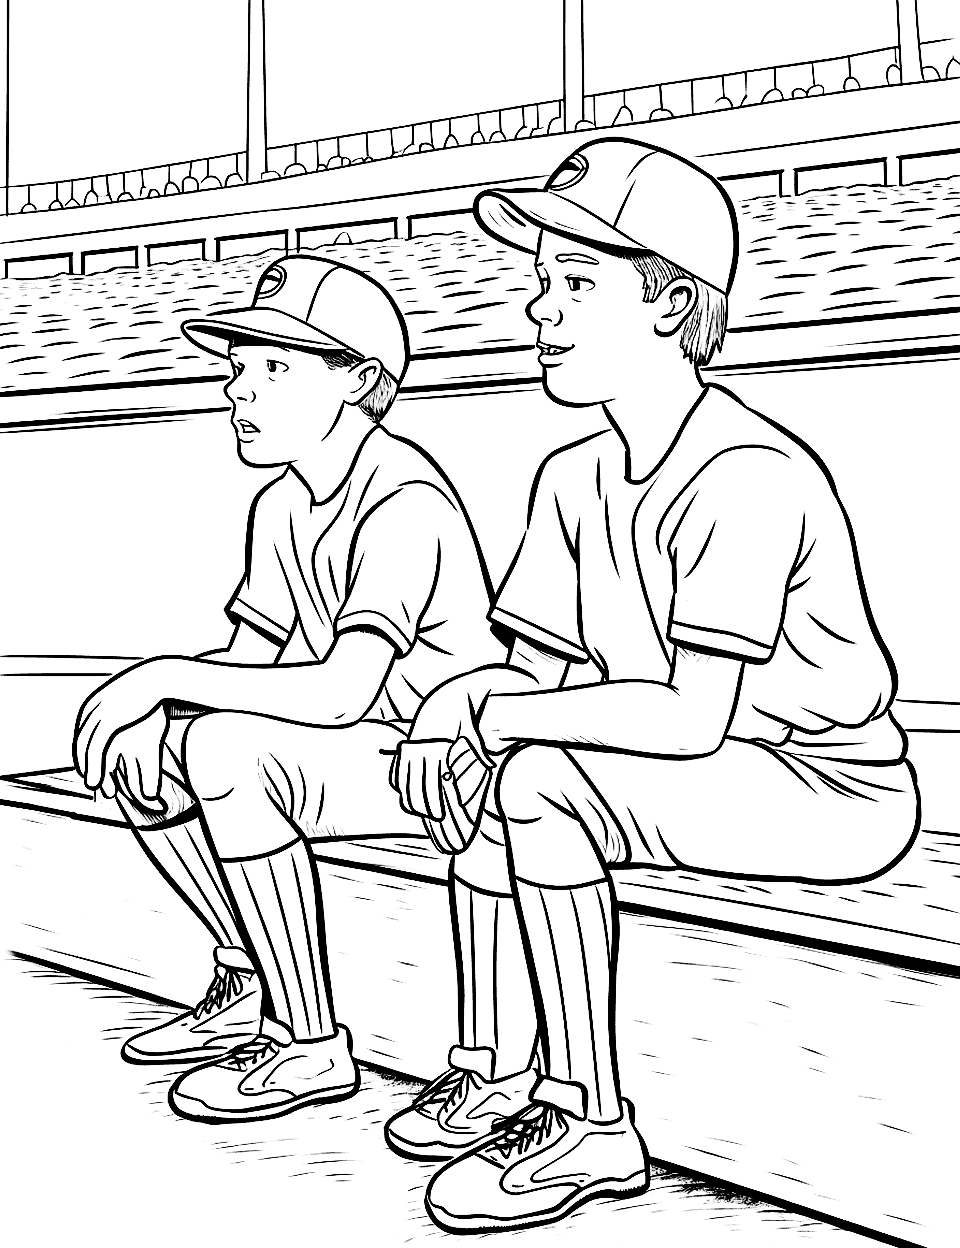 Bench Chatter Baseball Coloring Page - Players on the bench talking and strategizing during a half-time break.